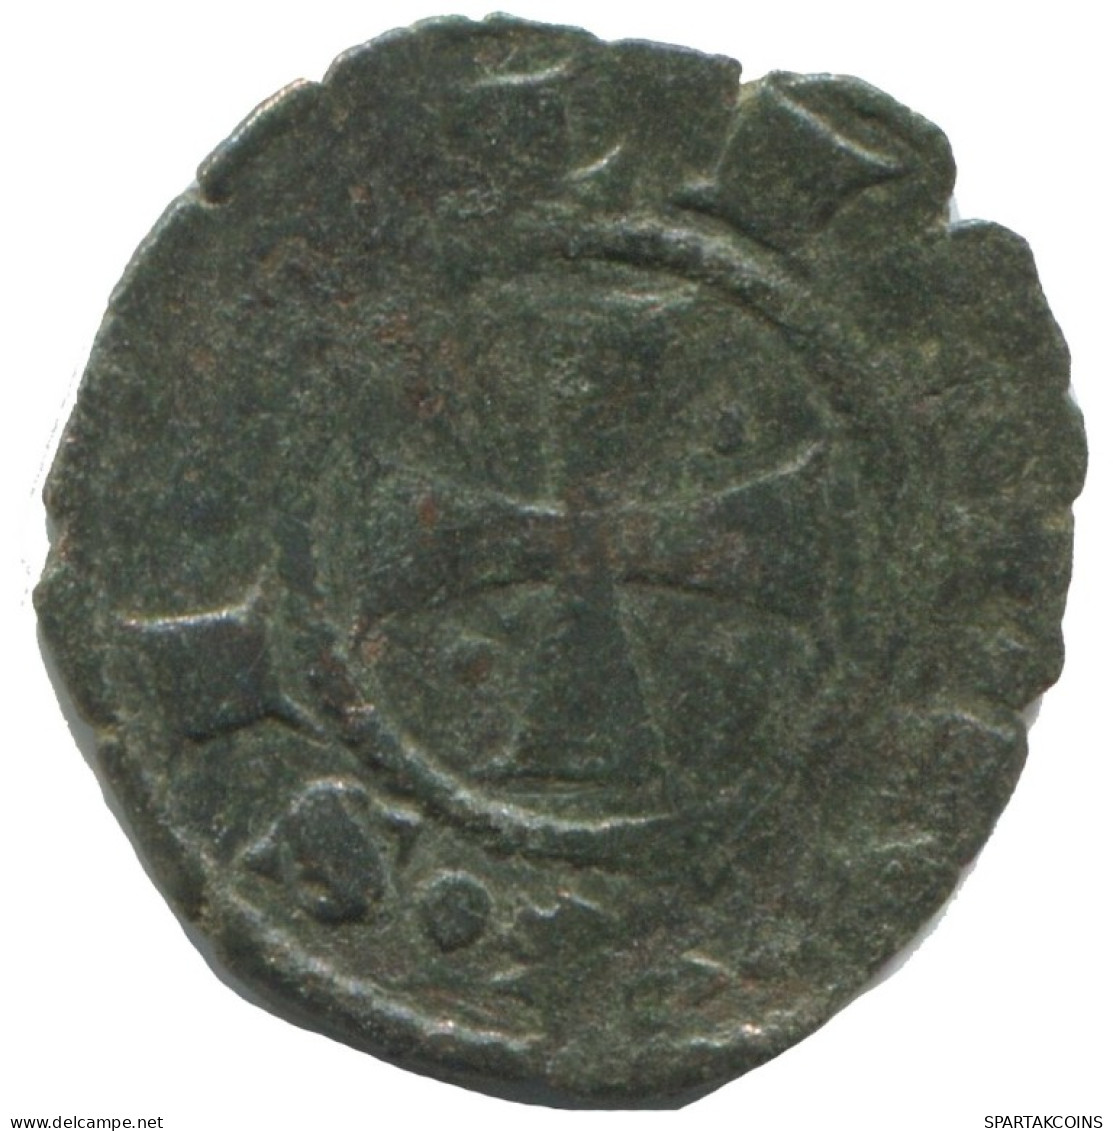 CRUSADER CROSS Authentic Original MEDIEVAL EUROPEAN Coin 0.7g/17mm #AC354.8.U.A - Other - Europe